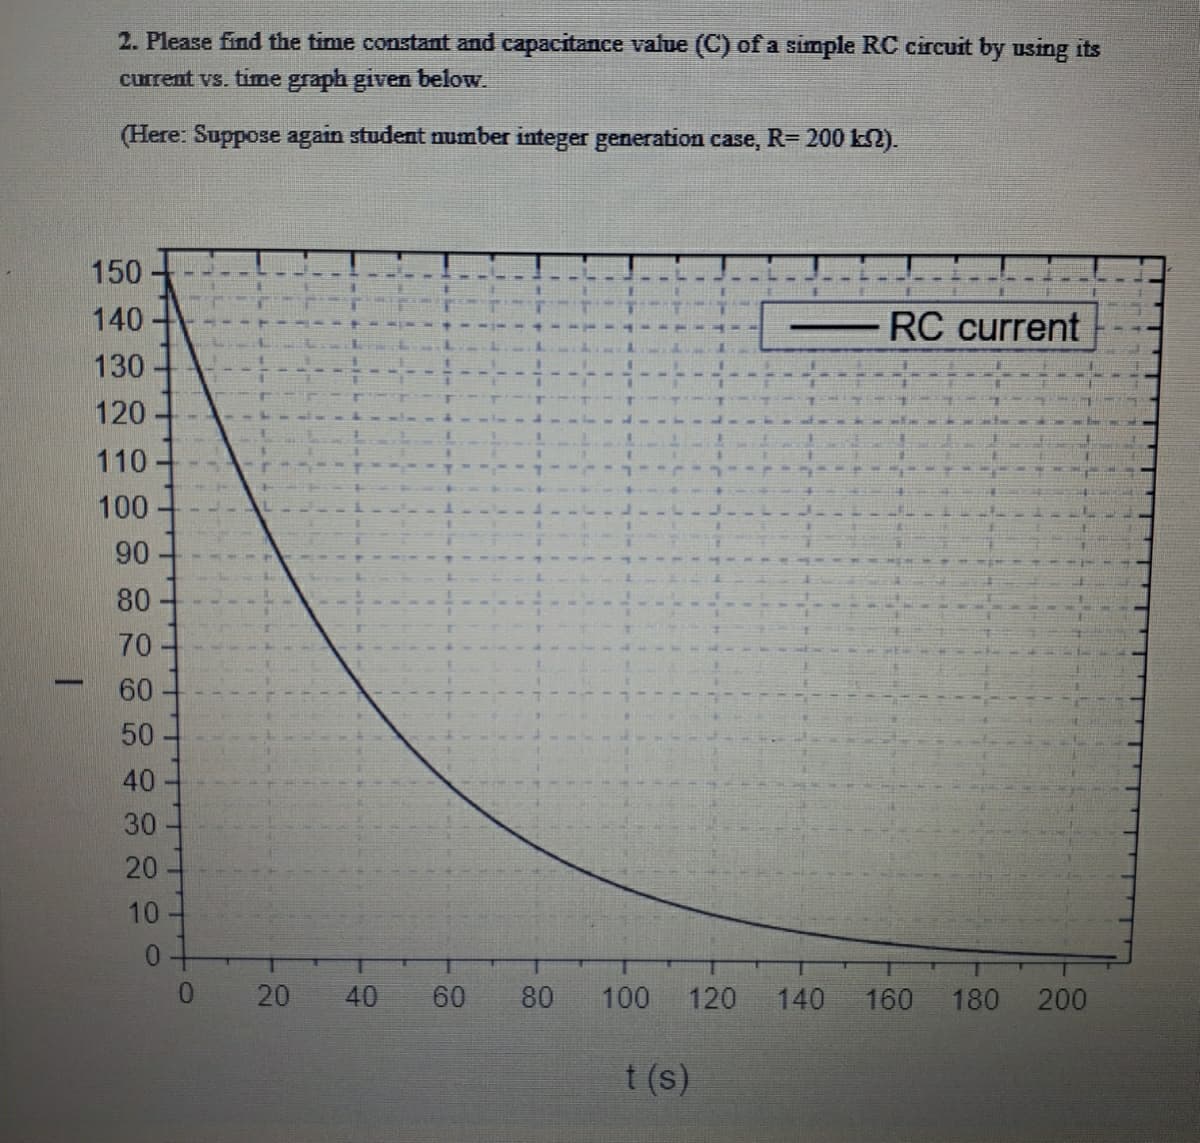 2. Please find the time constant and capacitance value (C) of a simple RC circuit by using its
current vs. timne graph given below.
(Here: Suppose again student number integer generation case, R= 200 k2).
150
140
RC current
130
120
110
100
90
80
70
60
50
40
30
20
10
0 -
60
80
100
120
140
160
180
200
t (s)
40
20
